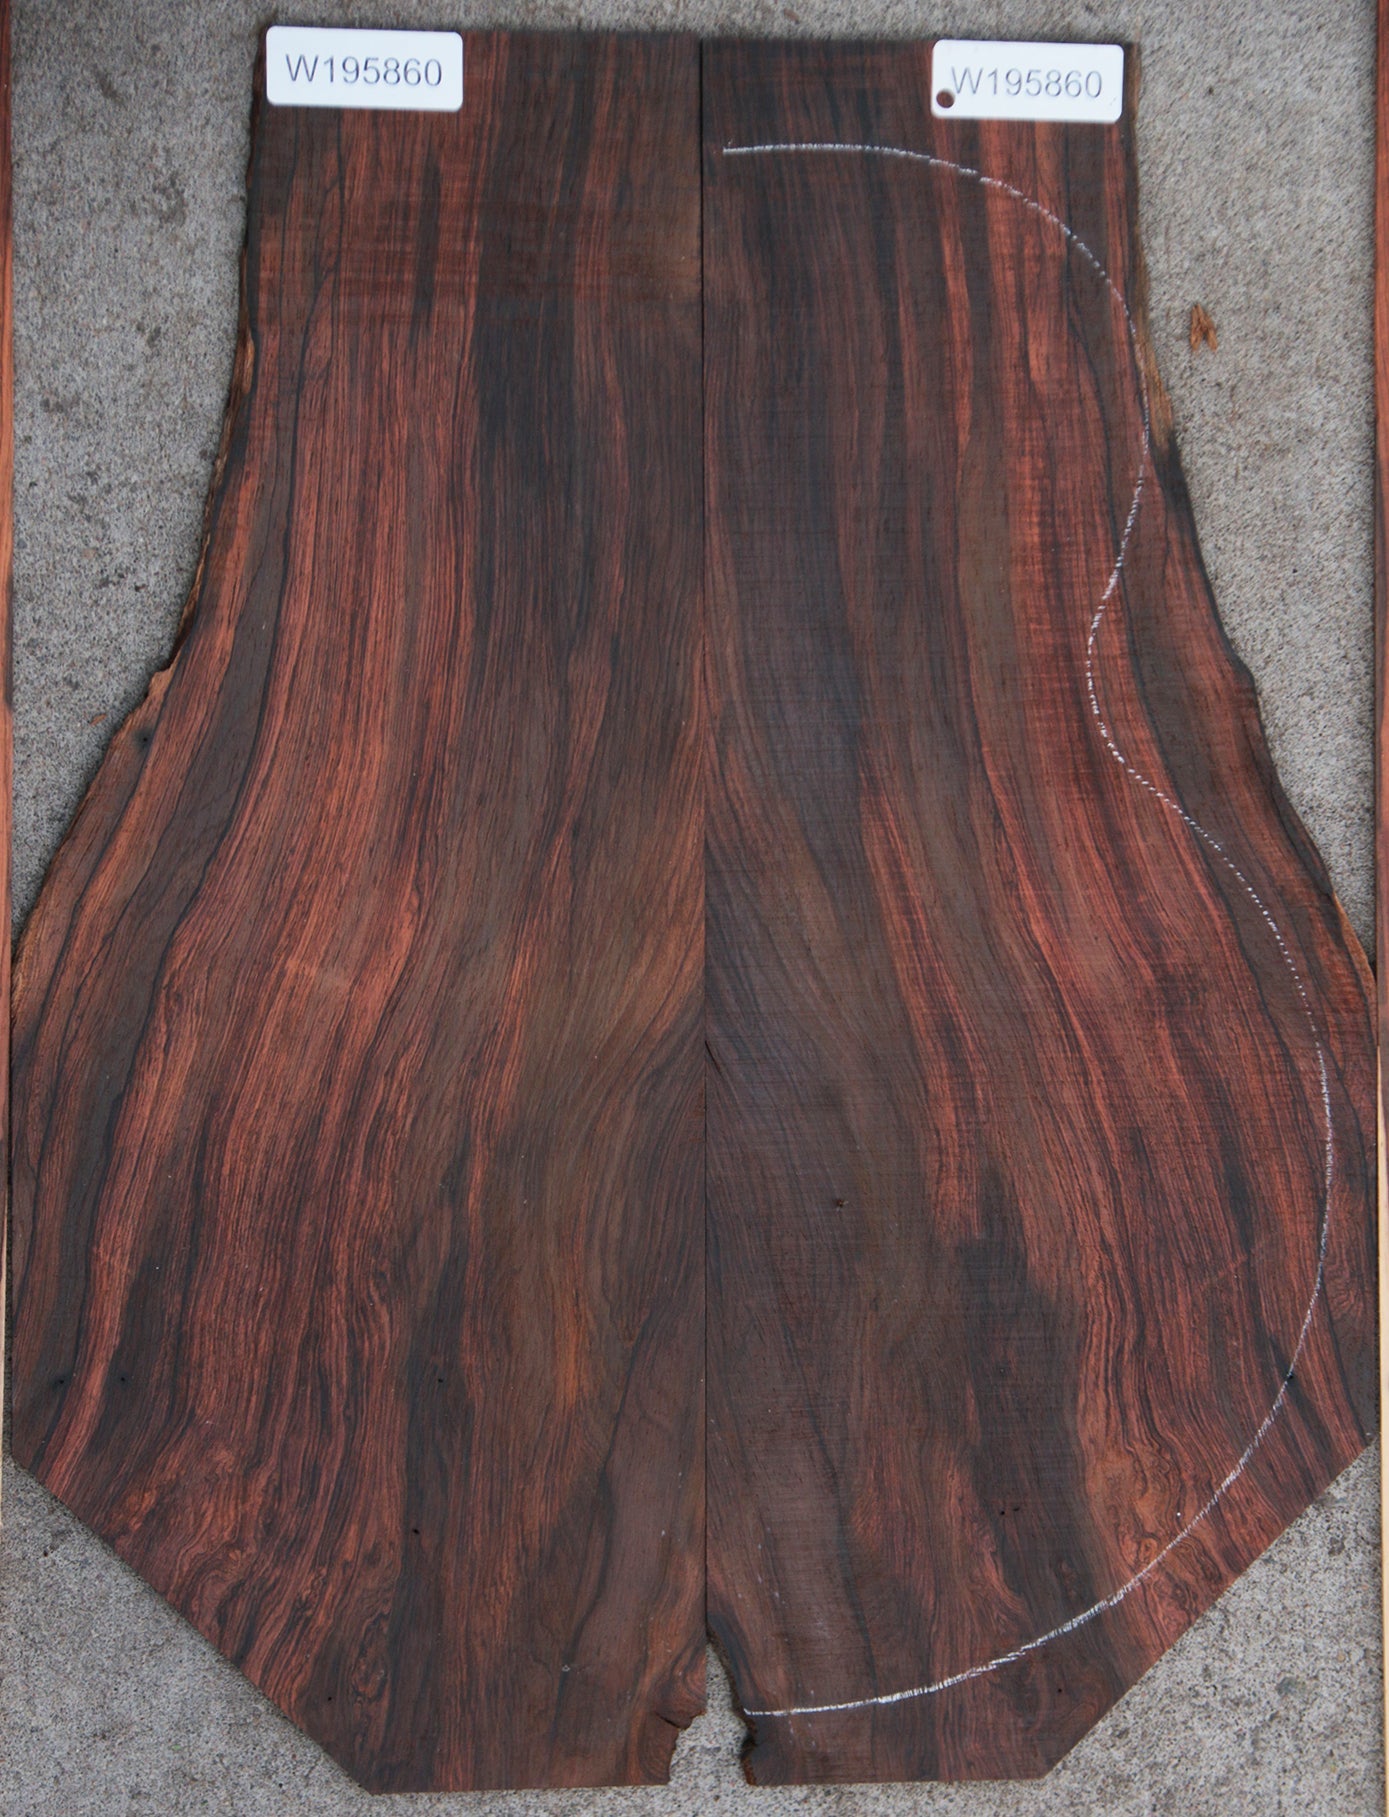 Exhibition Brazilian Rosewood Guitar Back and Side Set